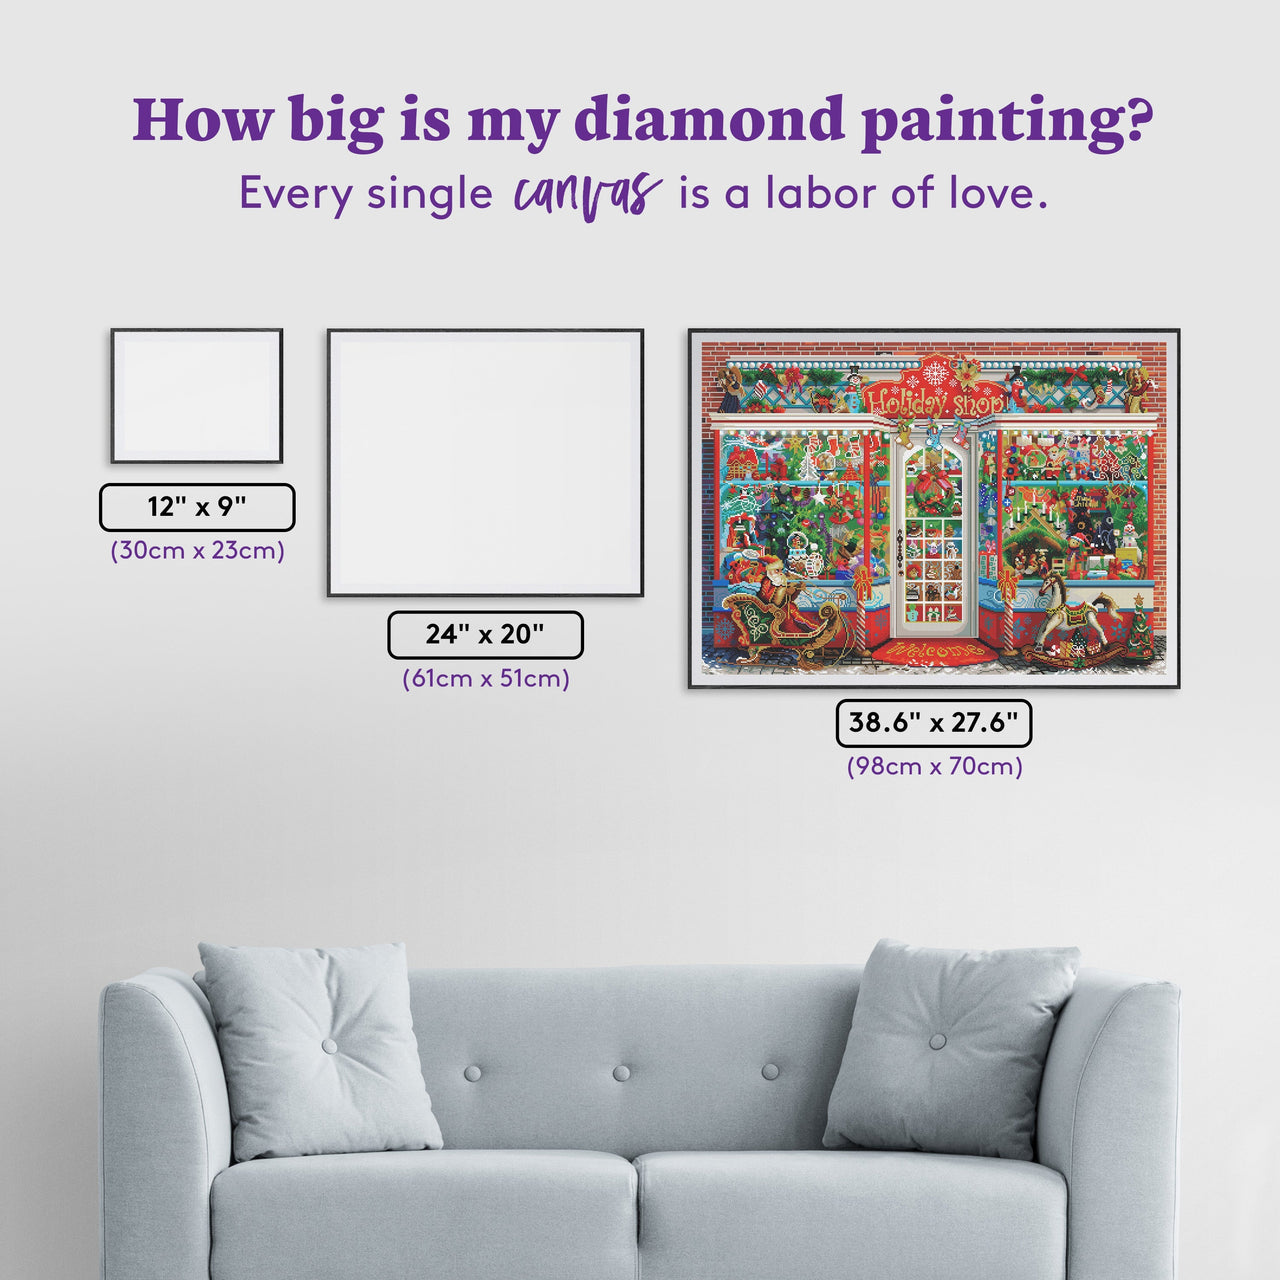 Diamond Painting Holiday Shop 38.6" x 27.6" (98cm x 70cm) / Square with 64 Colors including 3 ABs and 3 Fairy Dust Diamonds / 110,433